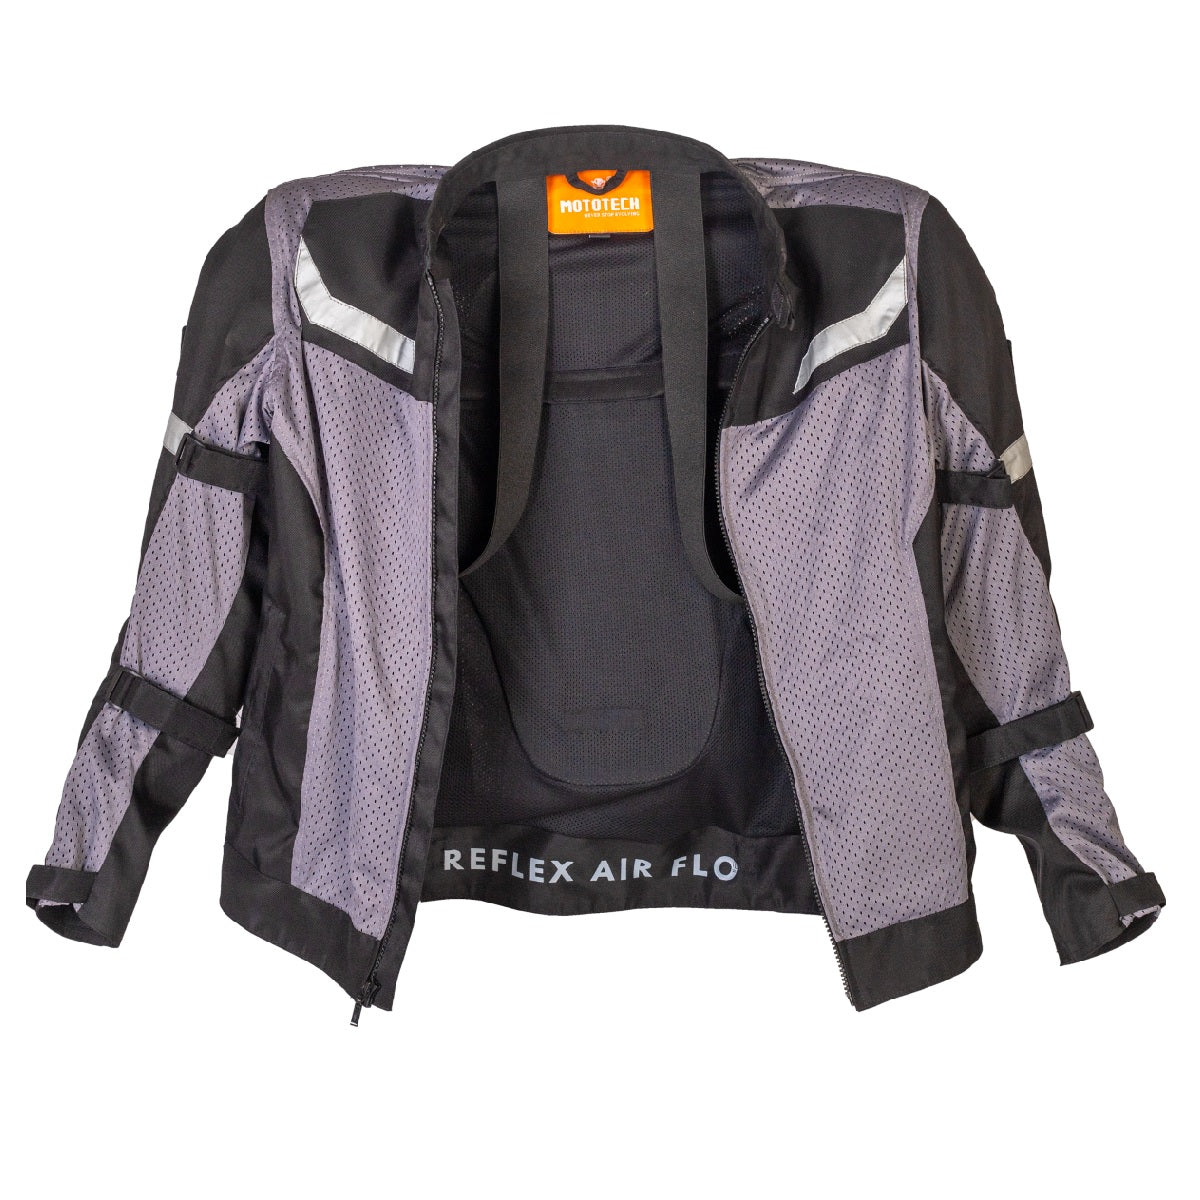 Riding Gear Level 1, Level 2 & Level 3 Jacket, Price with different Brands  Types - YouTube